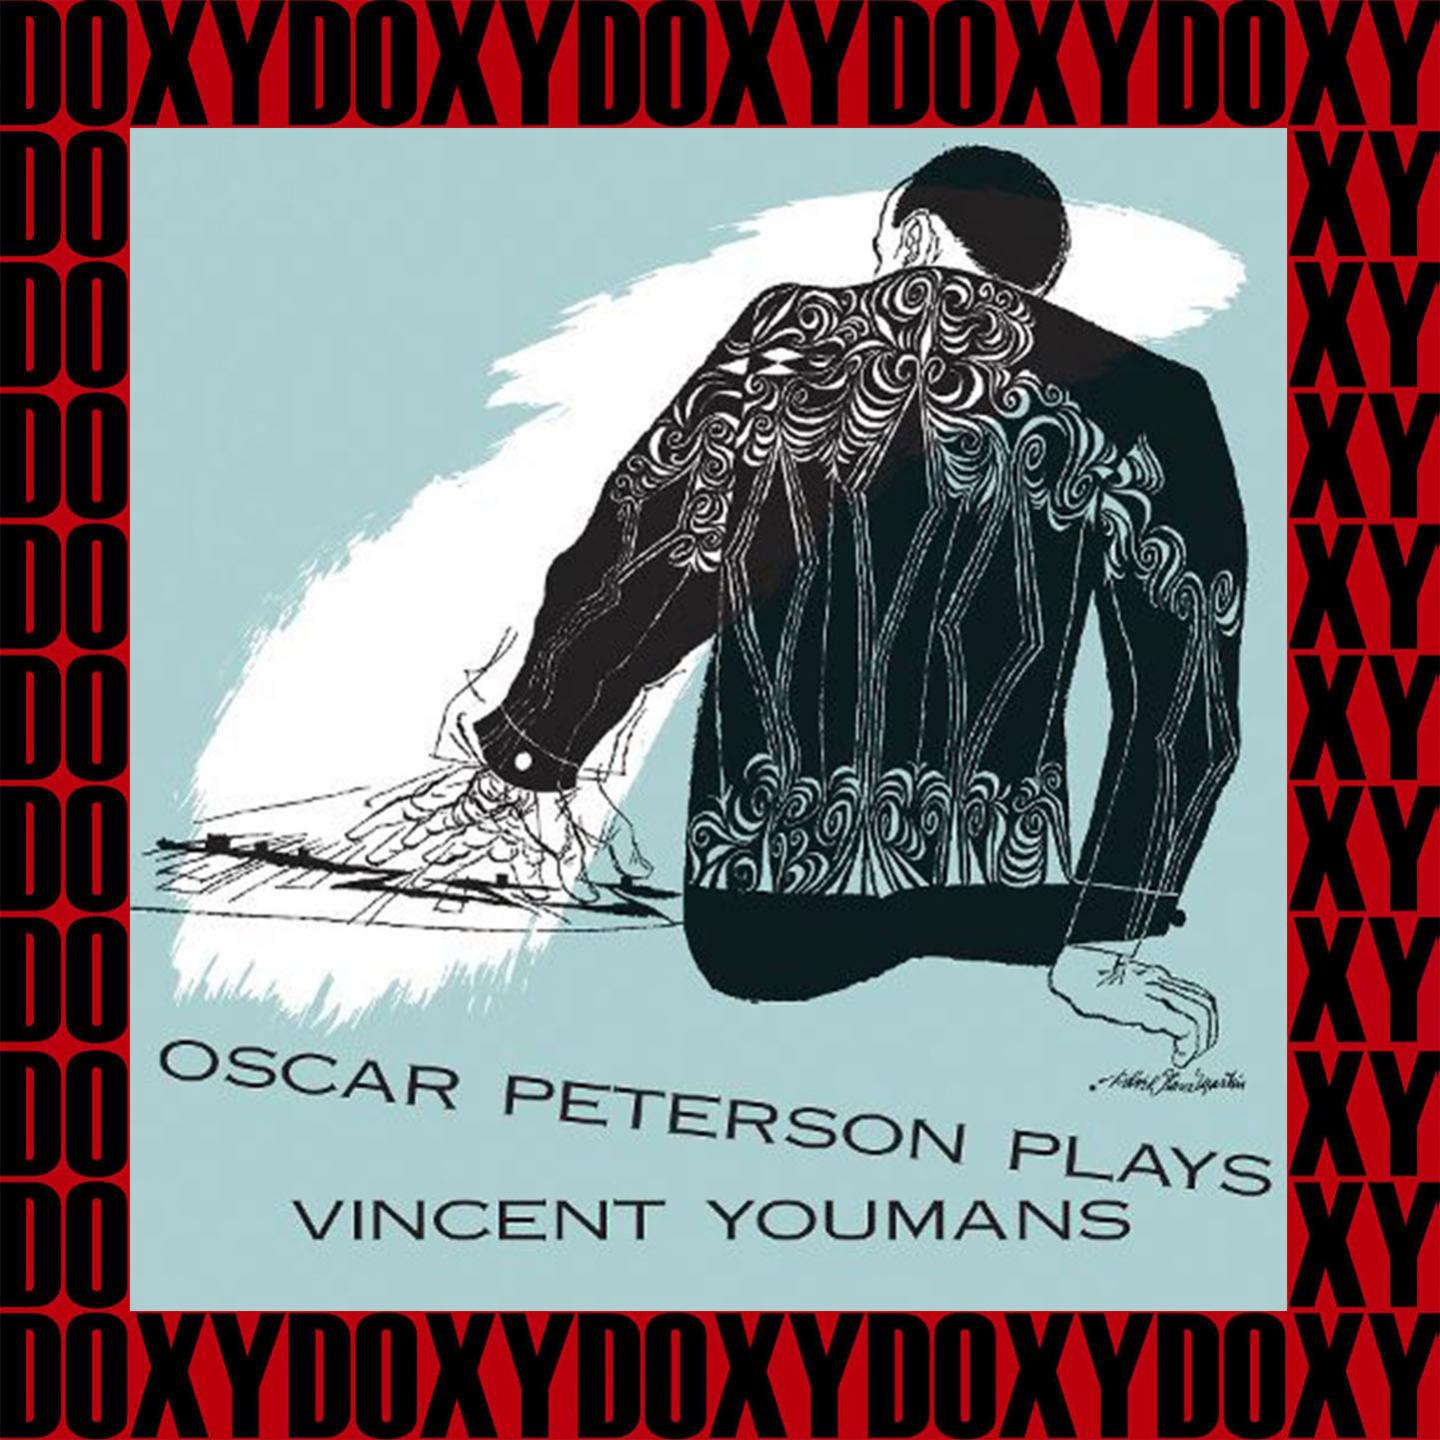 Oscar Peterson Plays Vincent Youmans (Remastered Version) (Doxy Collection)